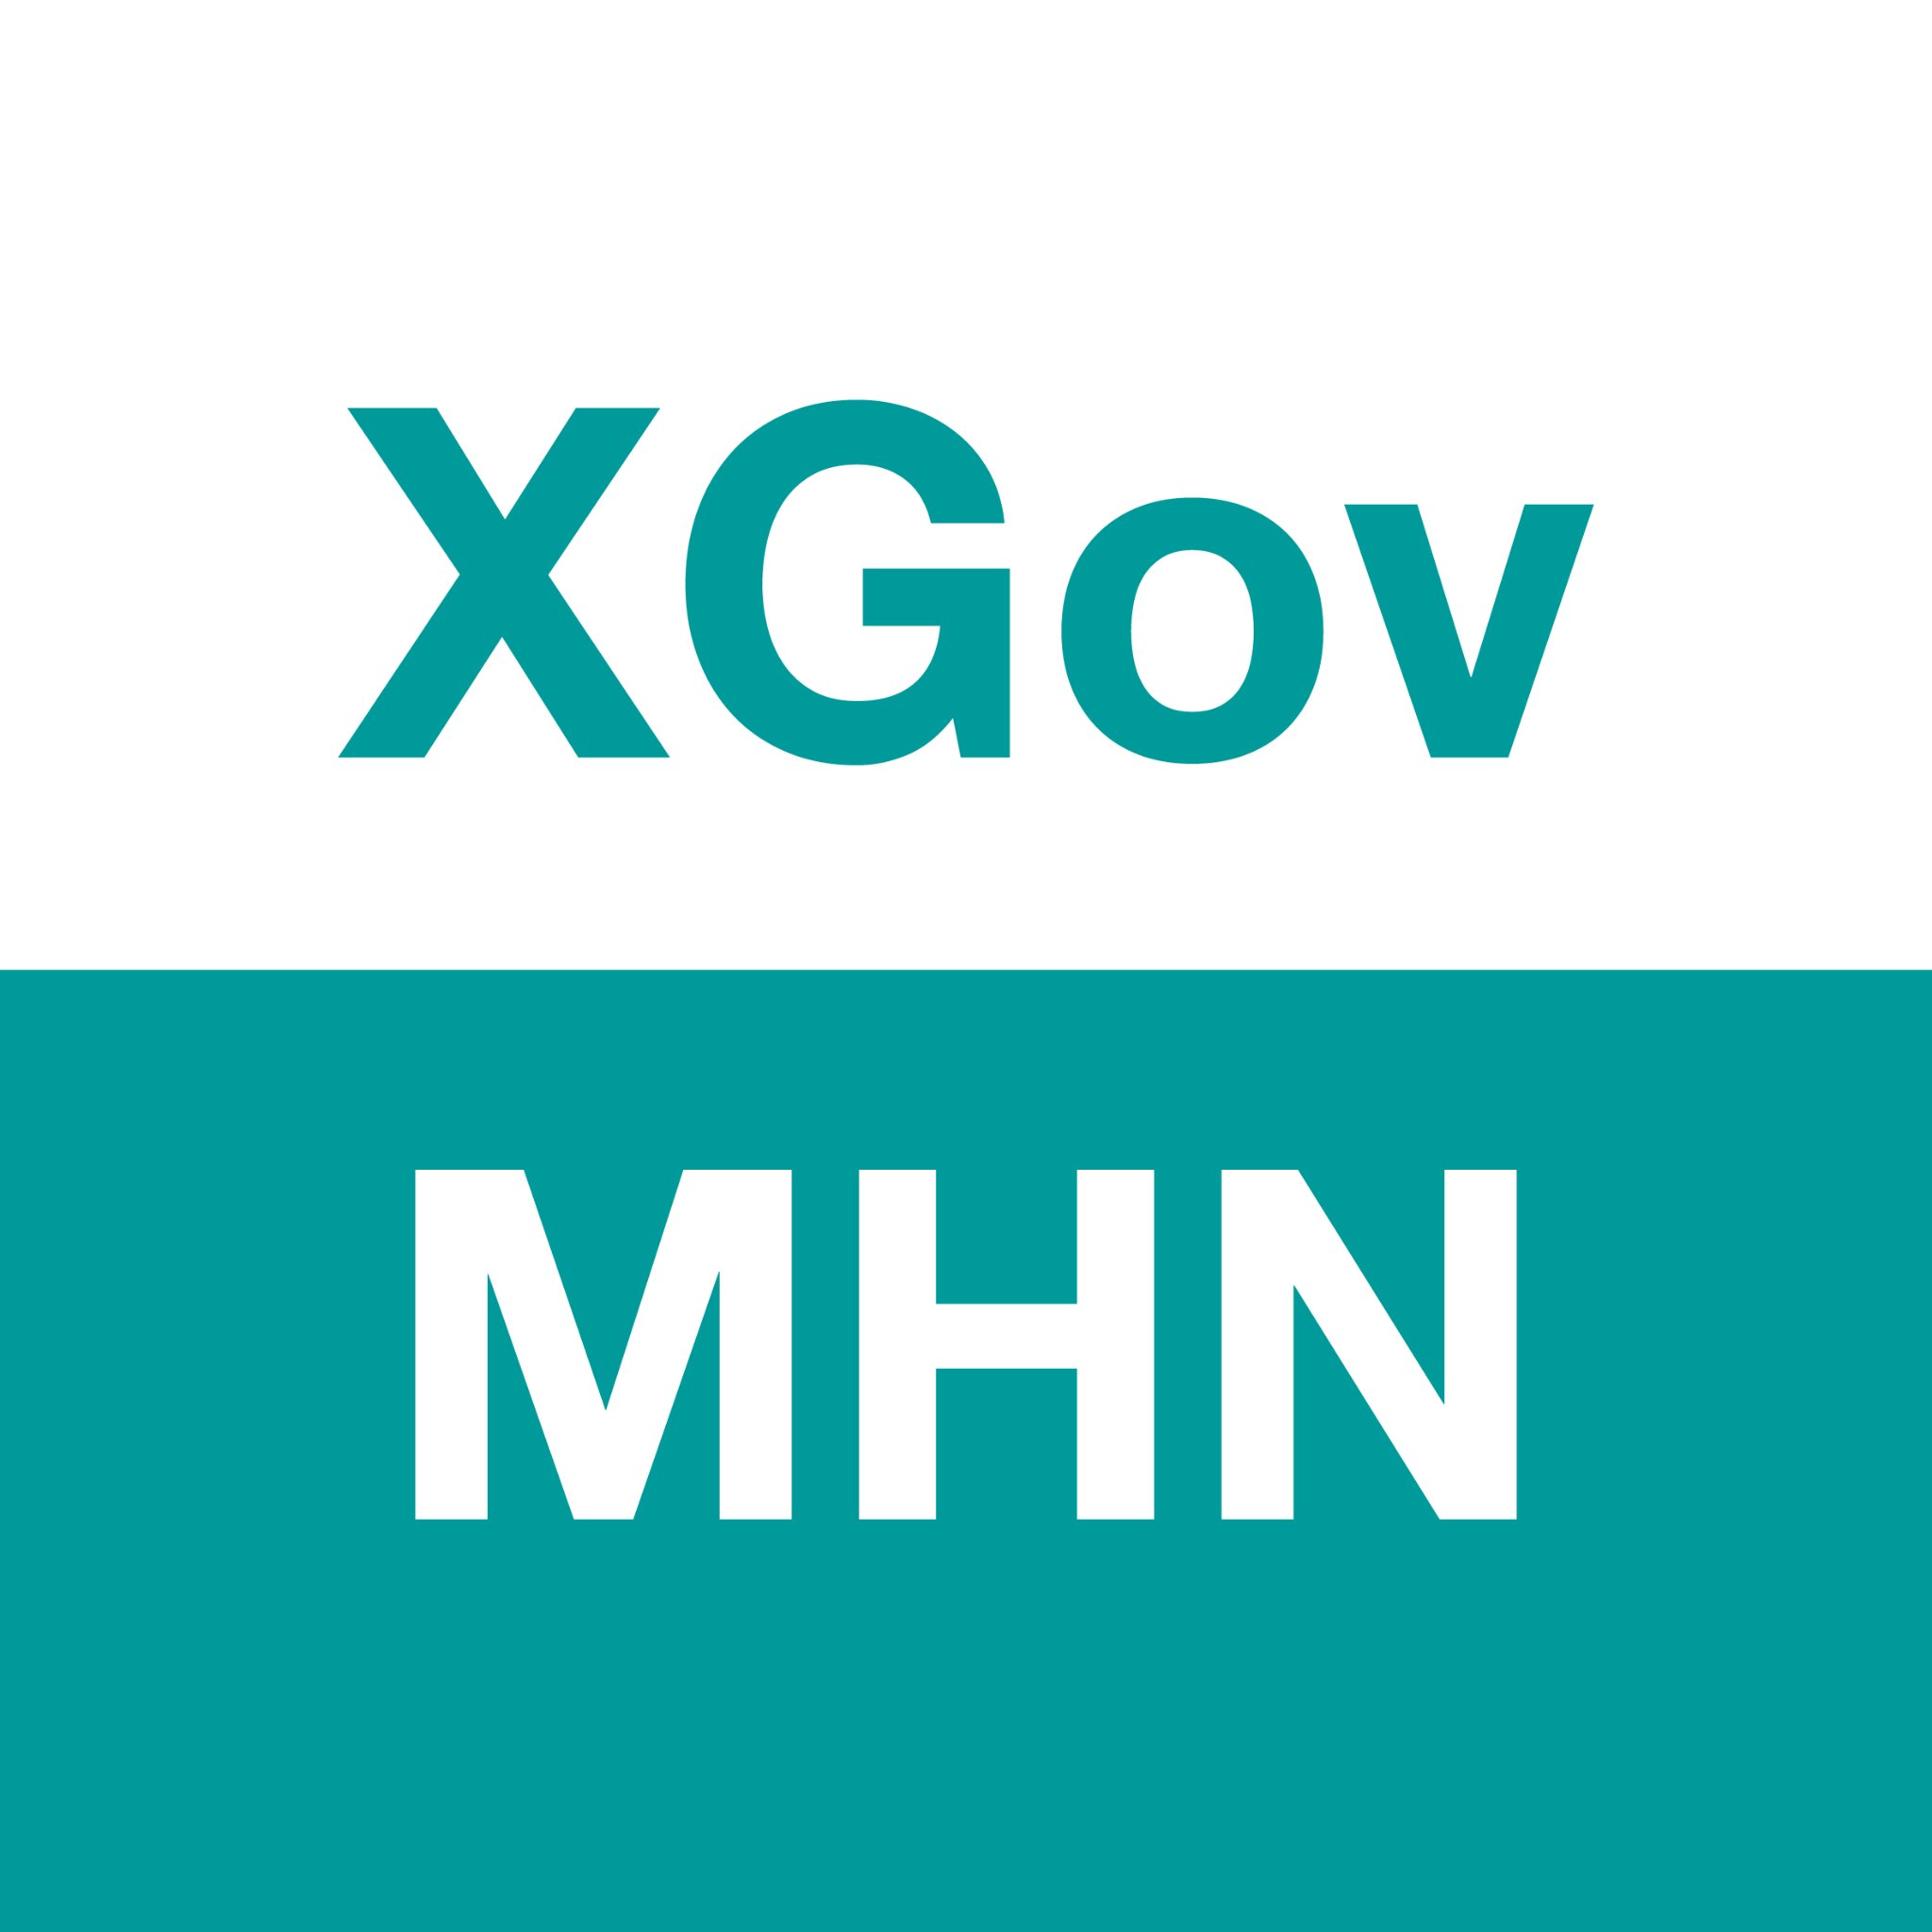 The Cross-Government Mental Health Network connects staff networks across UK government to share best practice and promote mental health and wellbeing at work